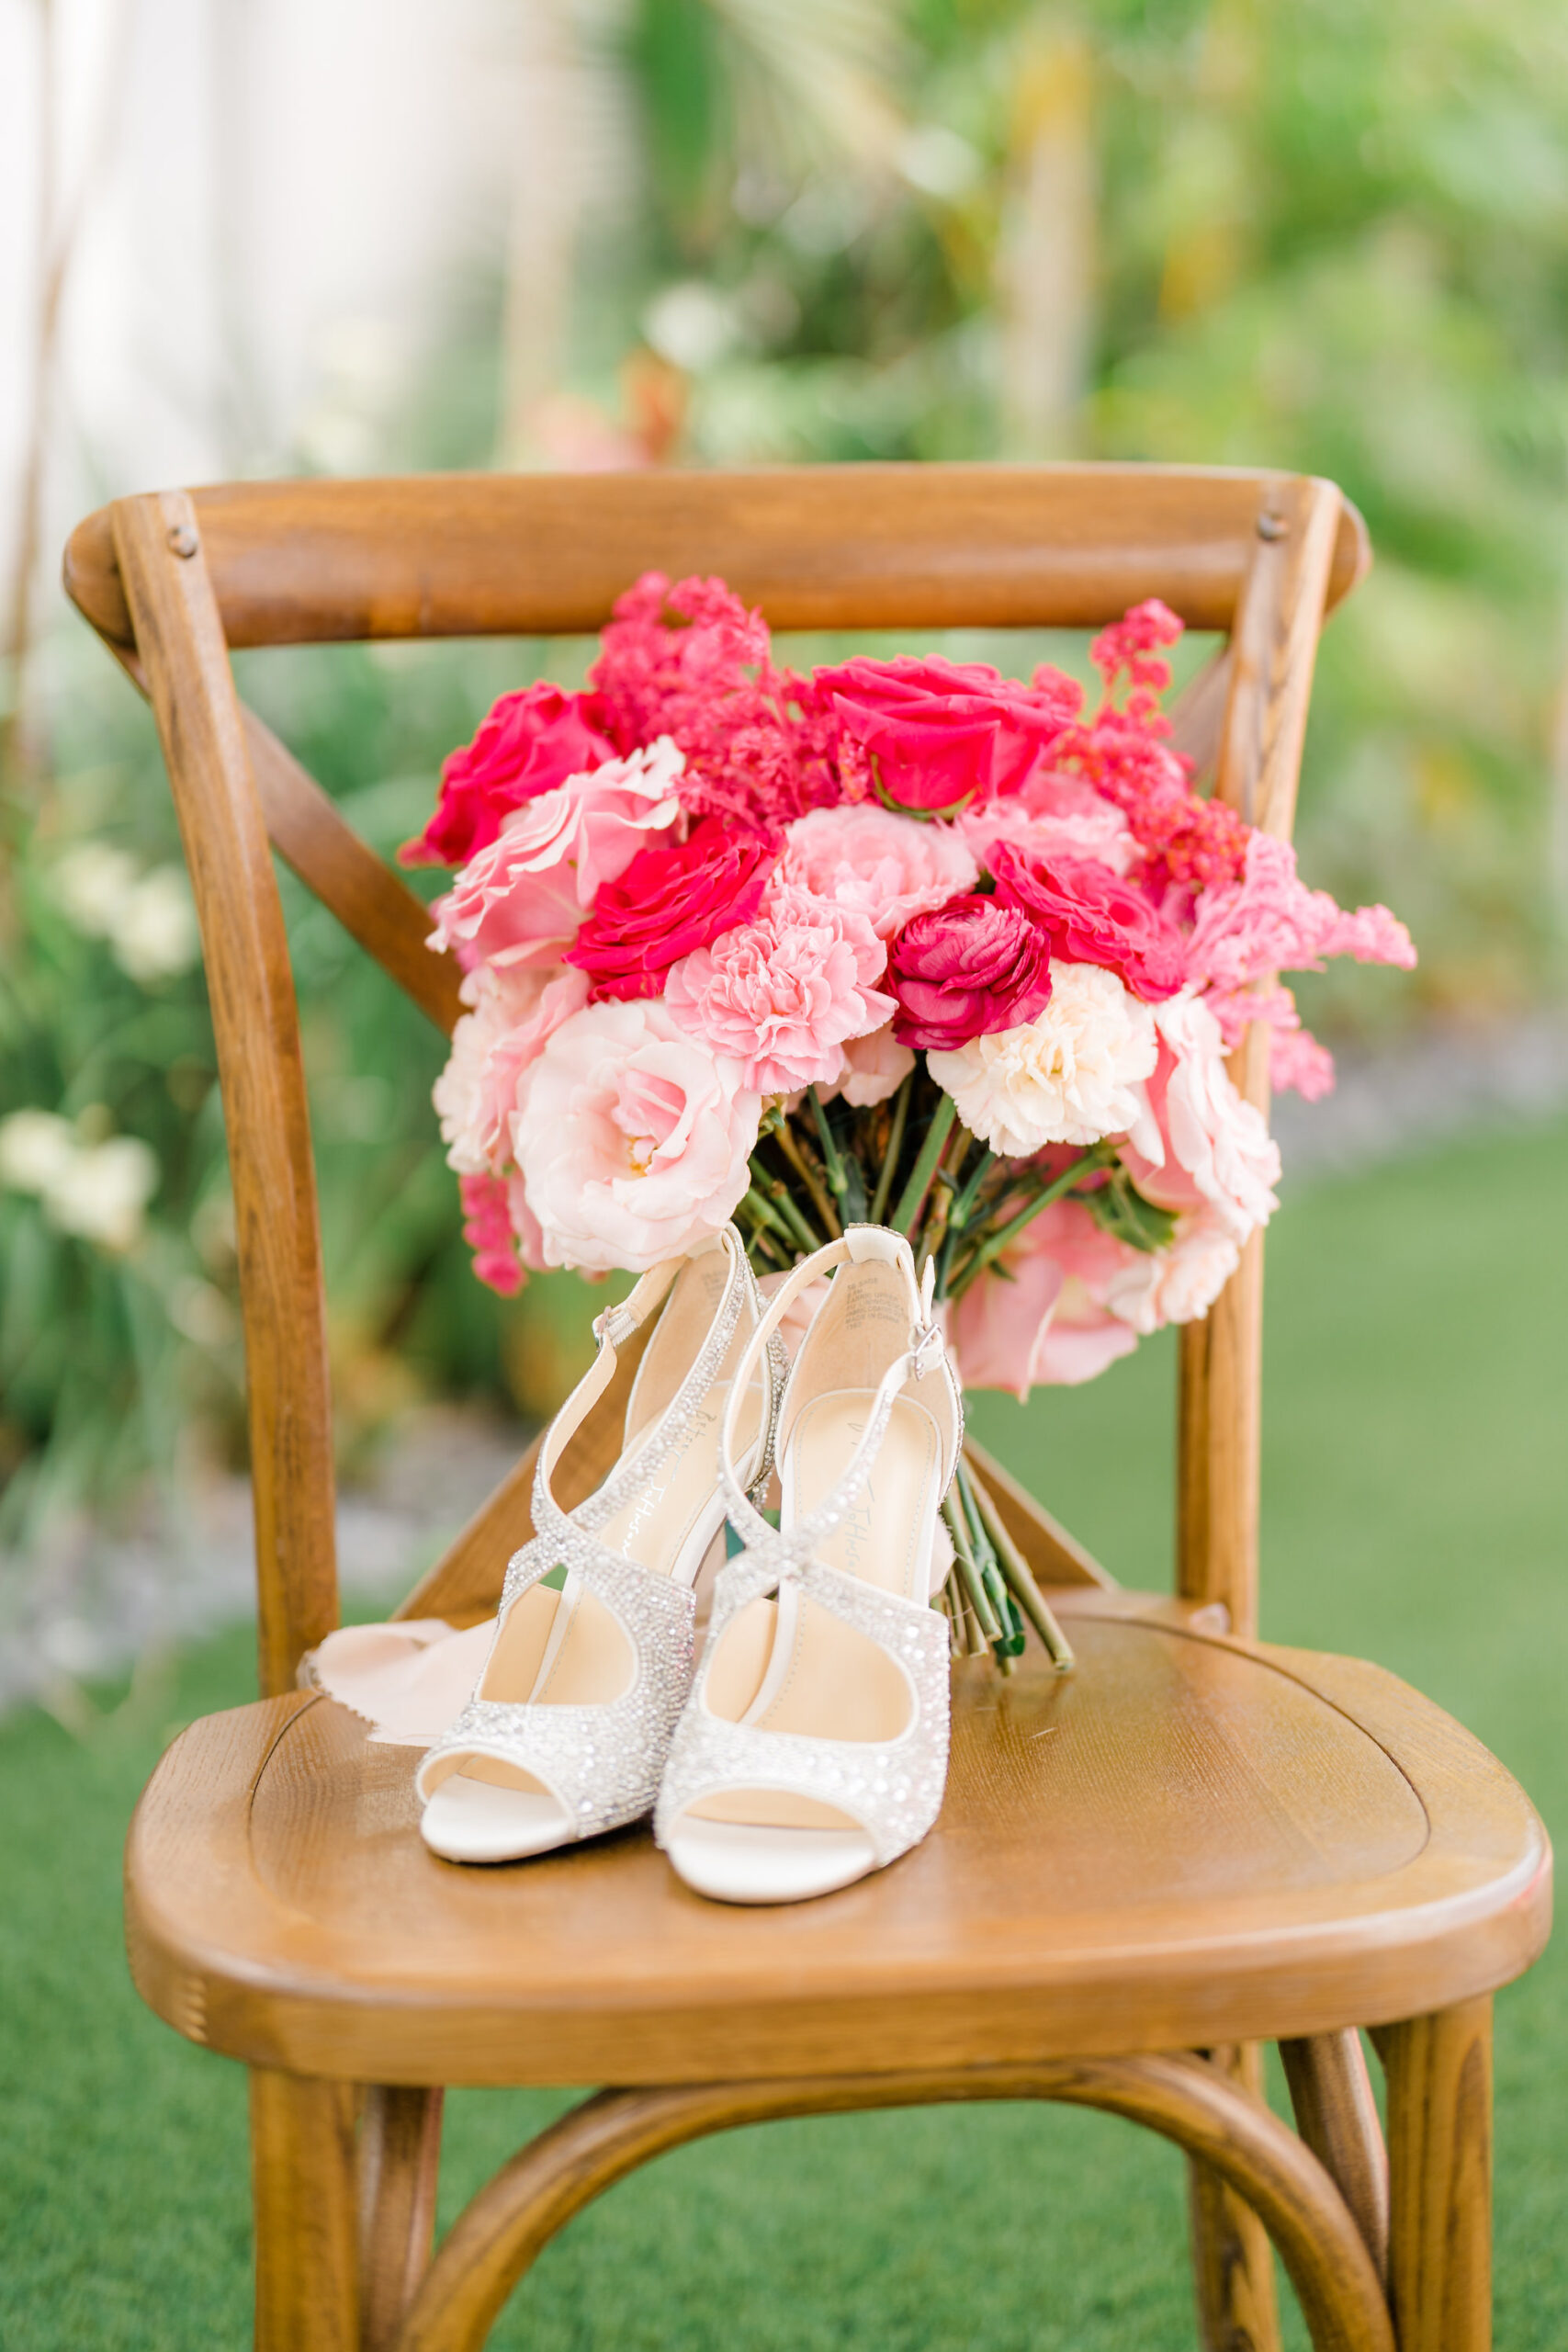 Whimsical Pink Roses Wedding Flower Bouquet, Bride Ivory Crystal Wedding Shoes on Wooden Cross Back Chair